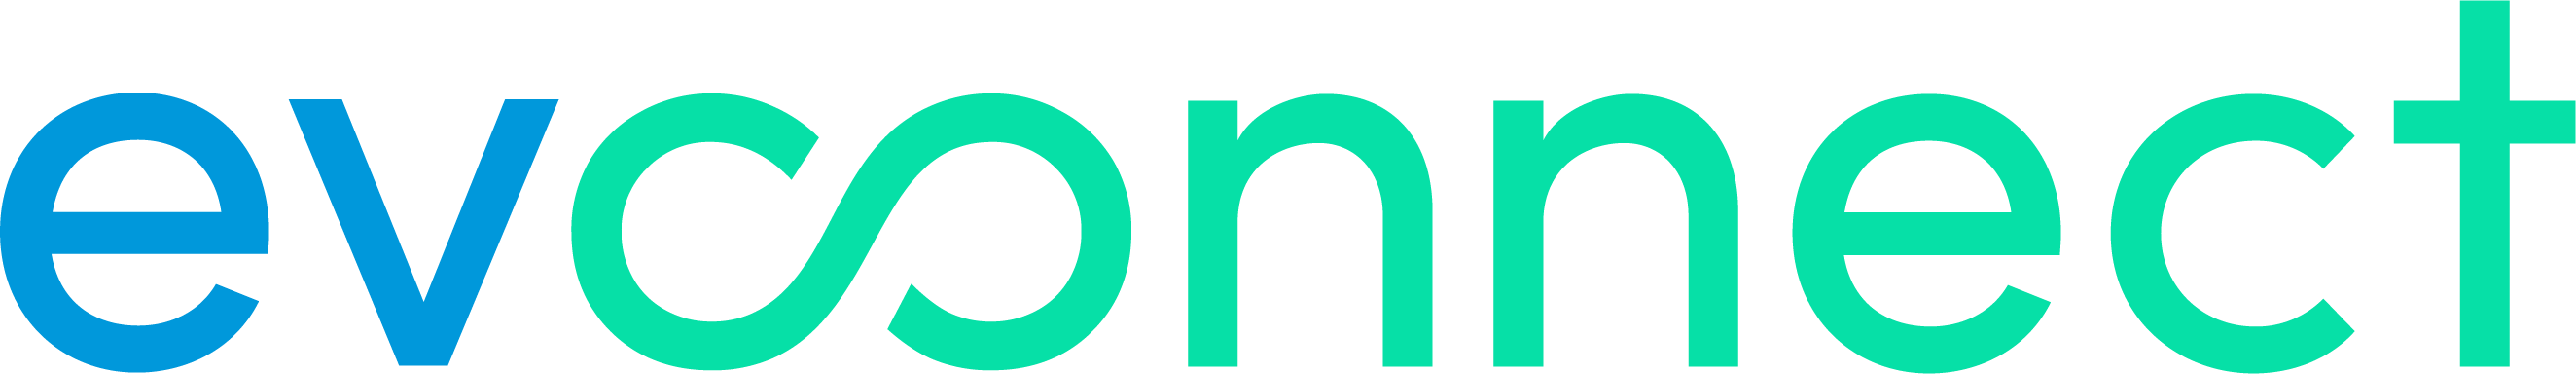 EVConnect logo.png